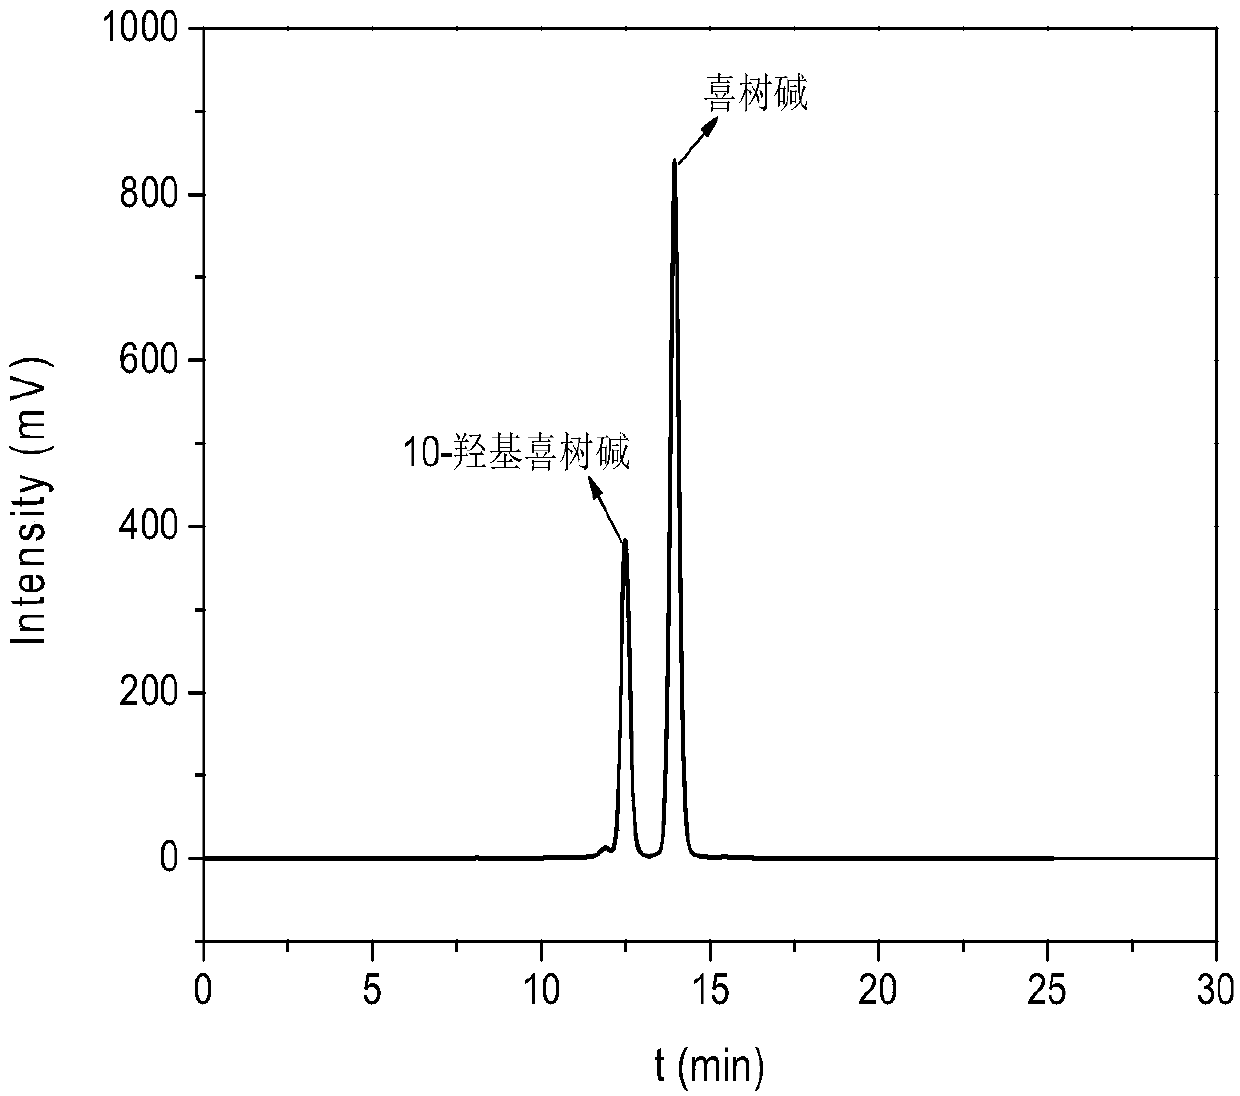 Method for efficient separation of camptothecin and 10-hydroxycamptothecin by core-shell SiO2@rosin-based polymer chromatographic column